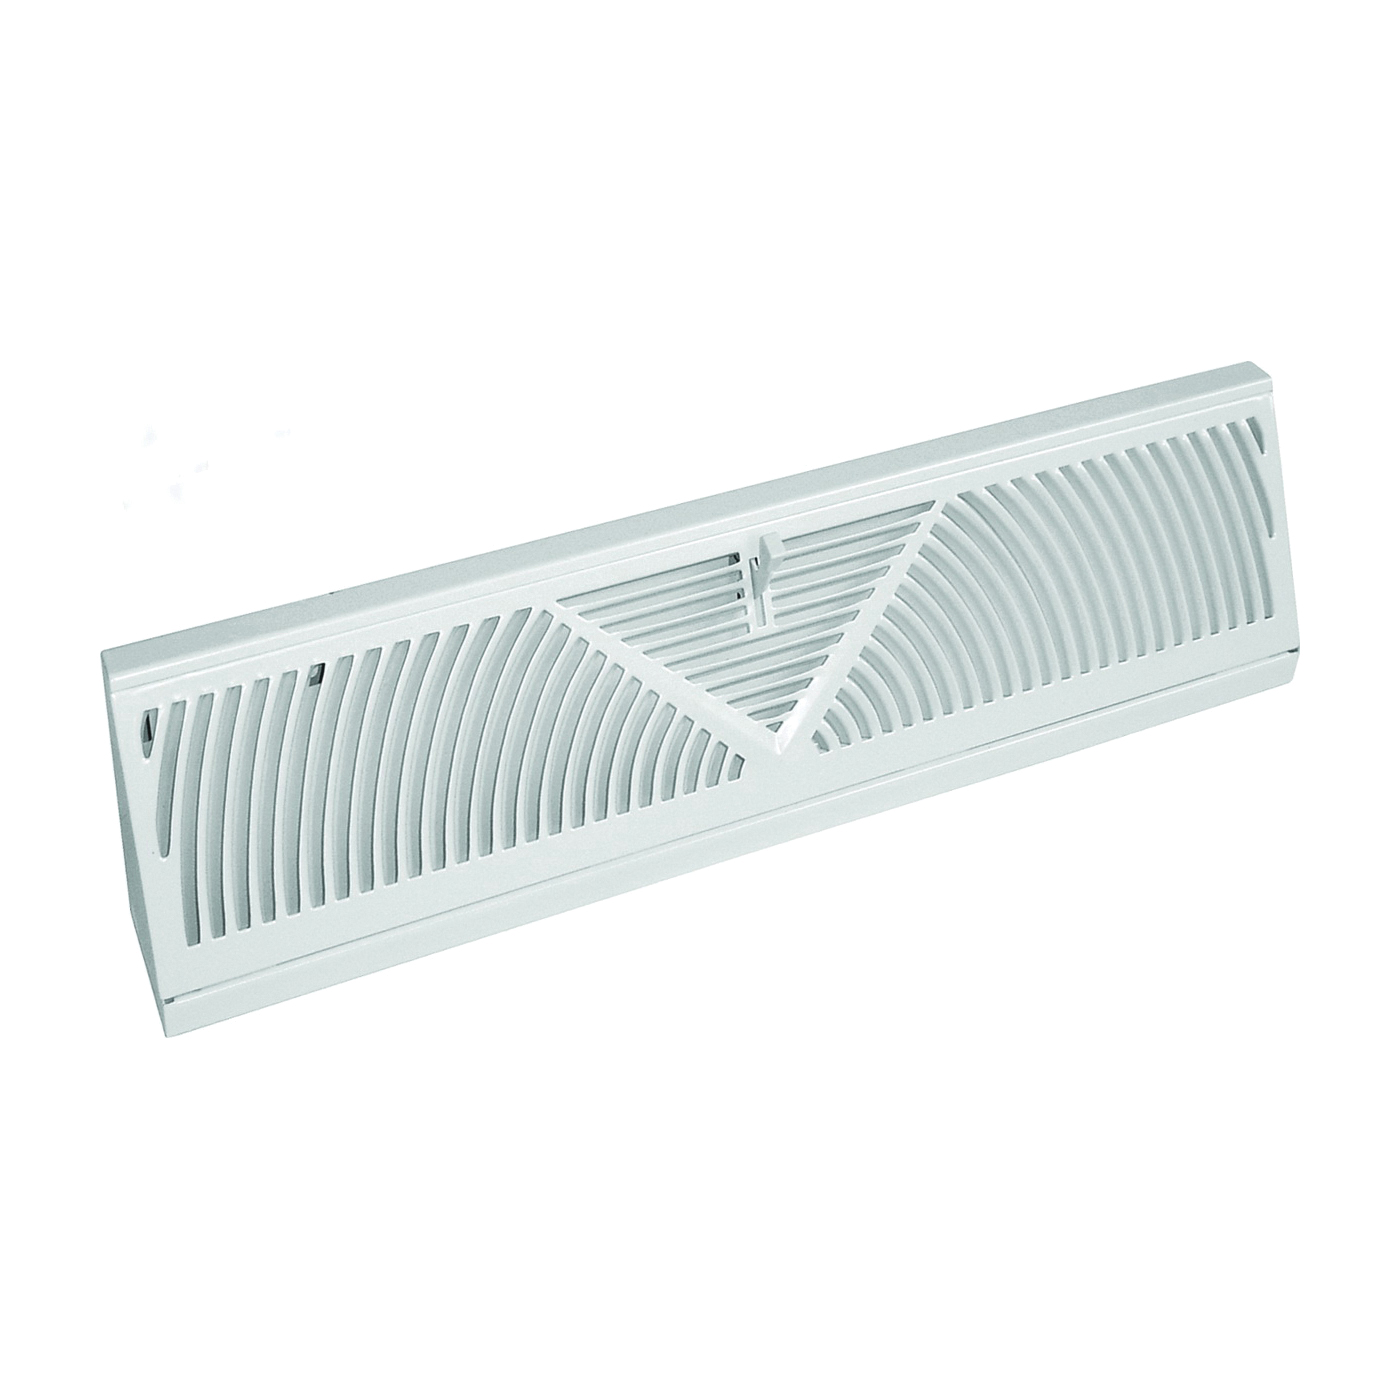 Imperial RG1627-A Baseboard Diffuser, 18 in L, 2-3/4 in W, Steel, White, Powder-Coated - 1